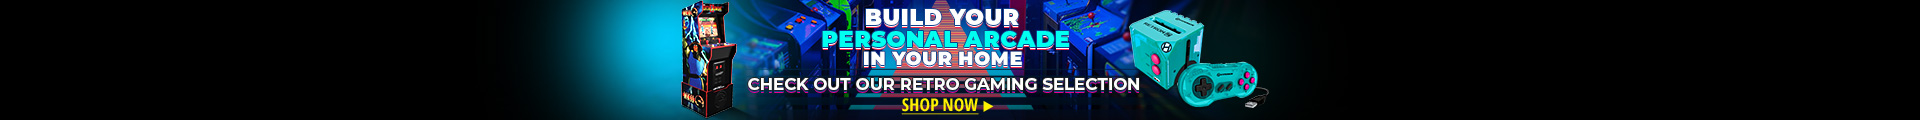 Build Your Personal Arcade in Your Home